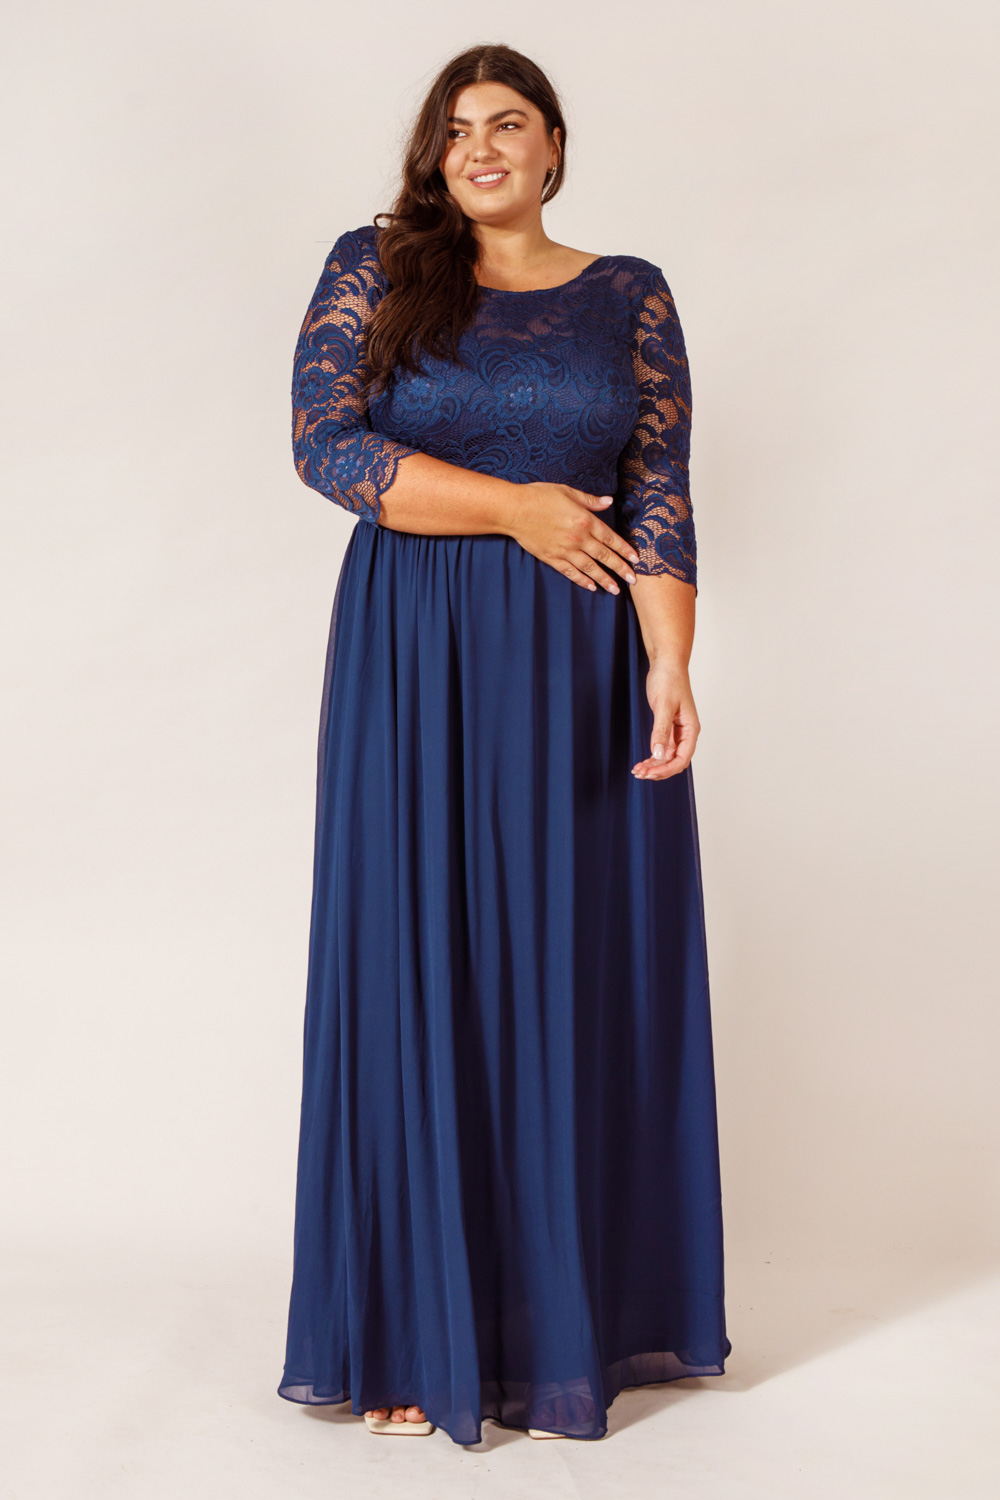 Try Before You Buy Zoey Bridesmaid Dress by Dressology